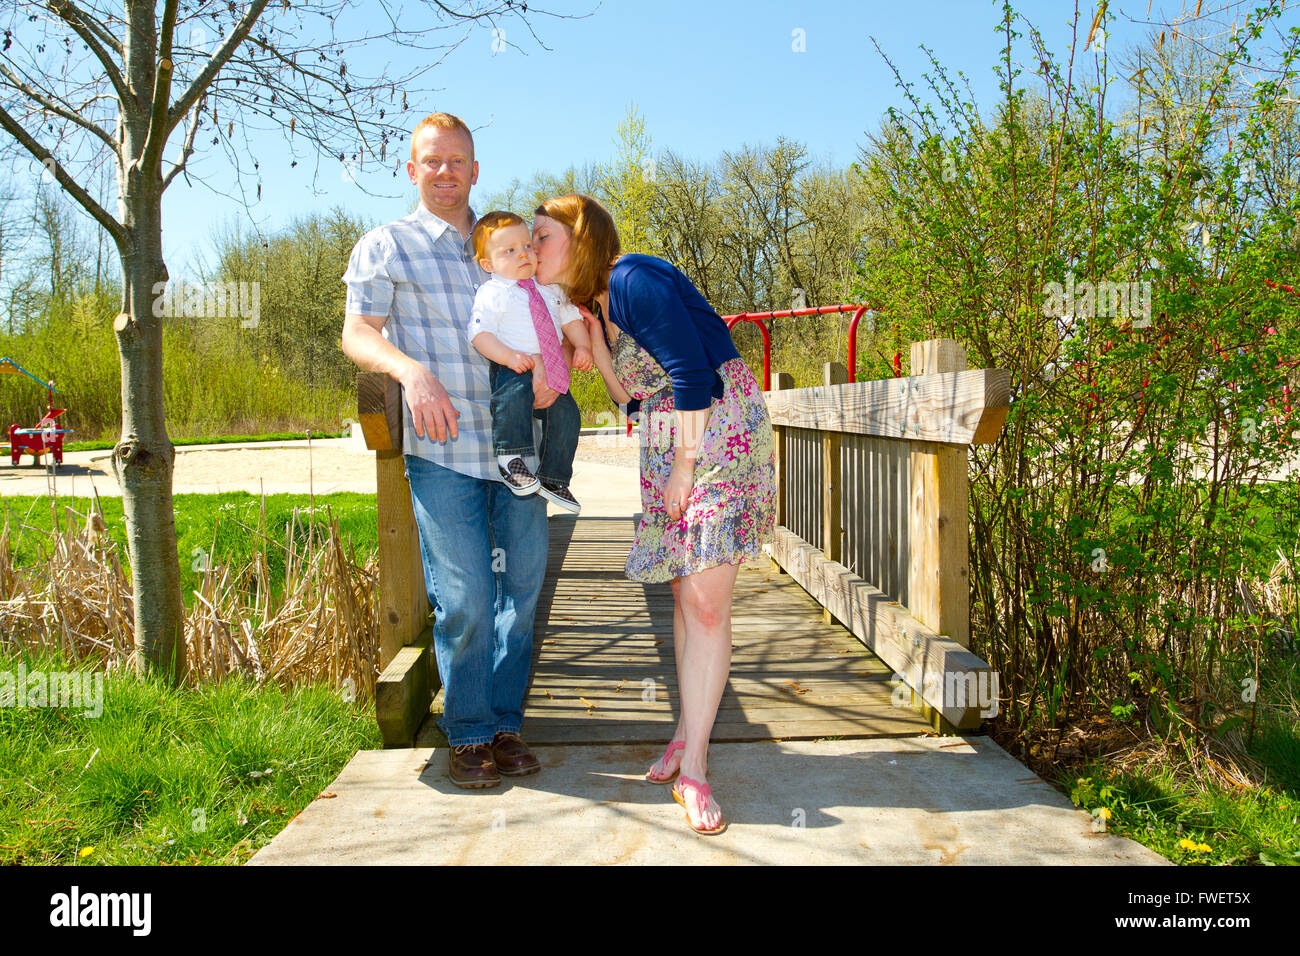 A man and a woman hold their baby one year old son while posing for a family photo outdoors. Stock Photo